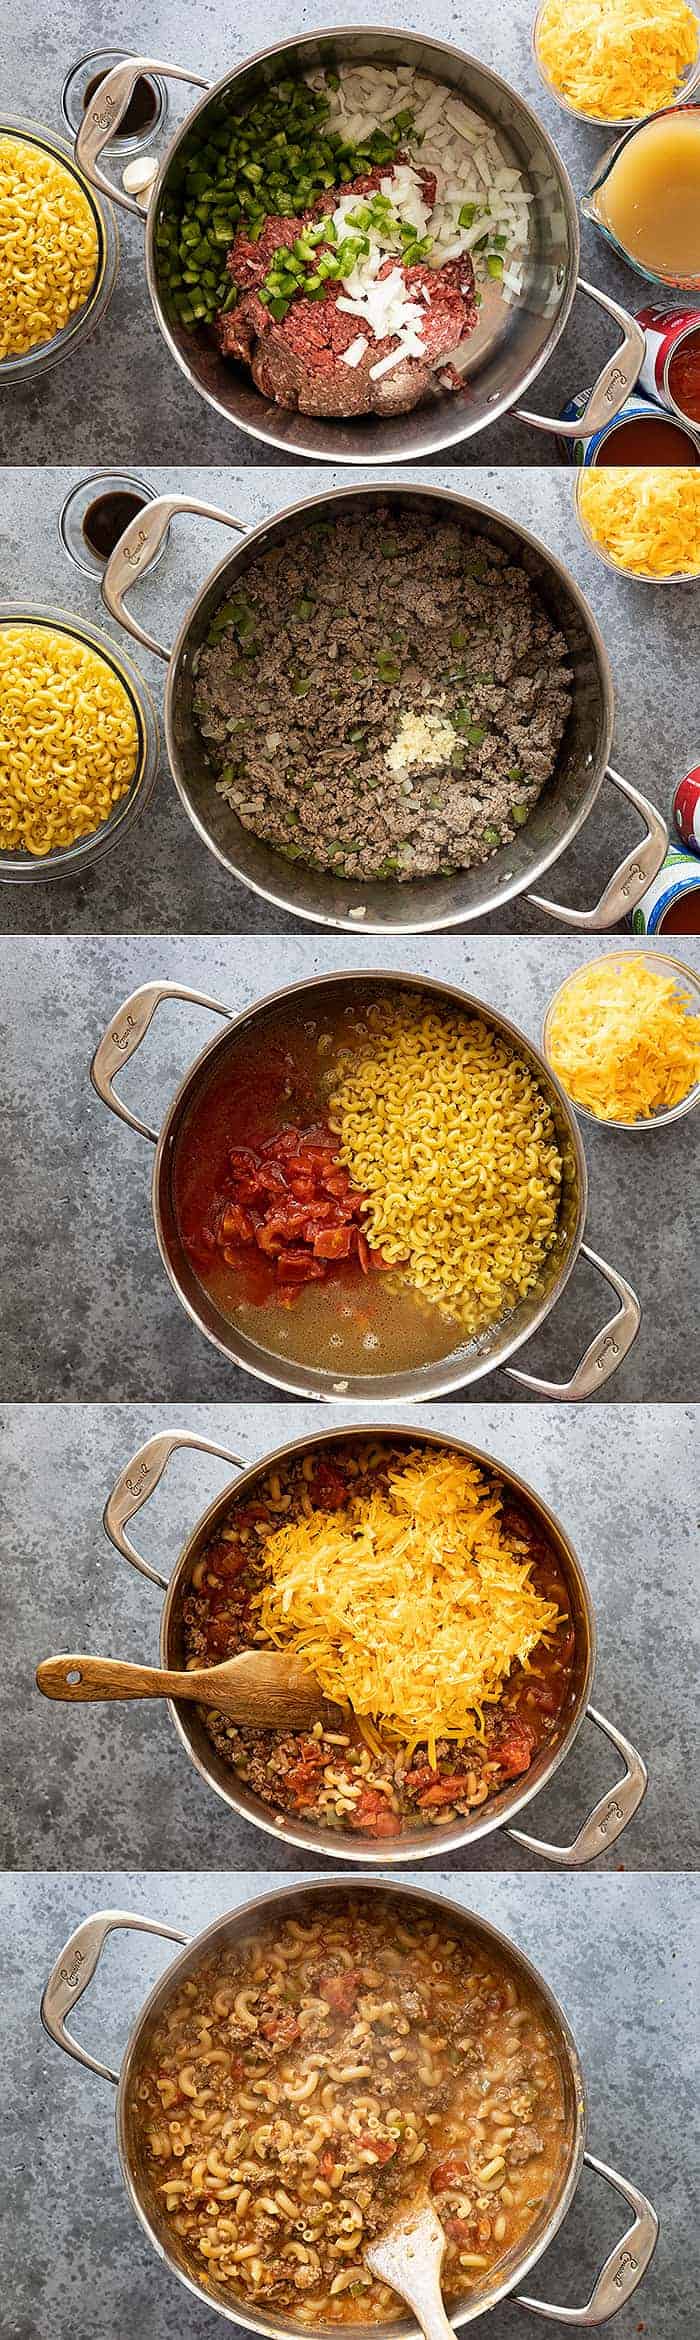 overhead process shots: the steps in make goulash American style. Browning the meat and veggies, adding the rest (except the cheese) and cooking until the pasta is tender 